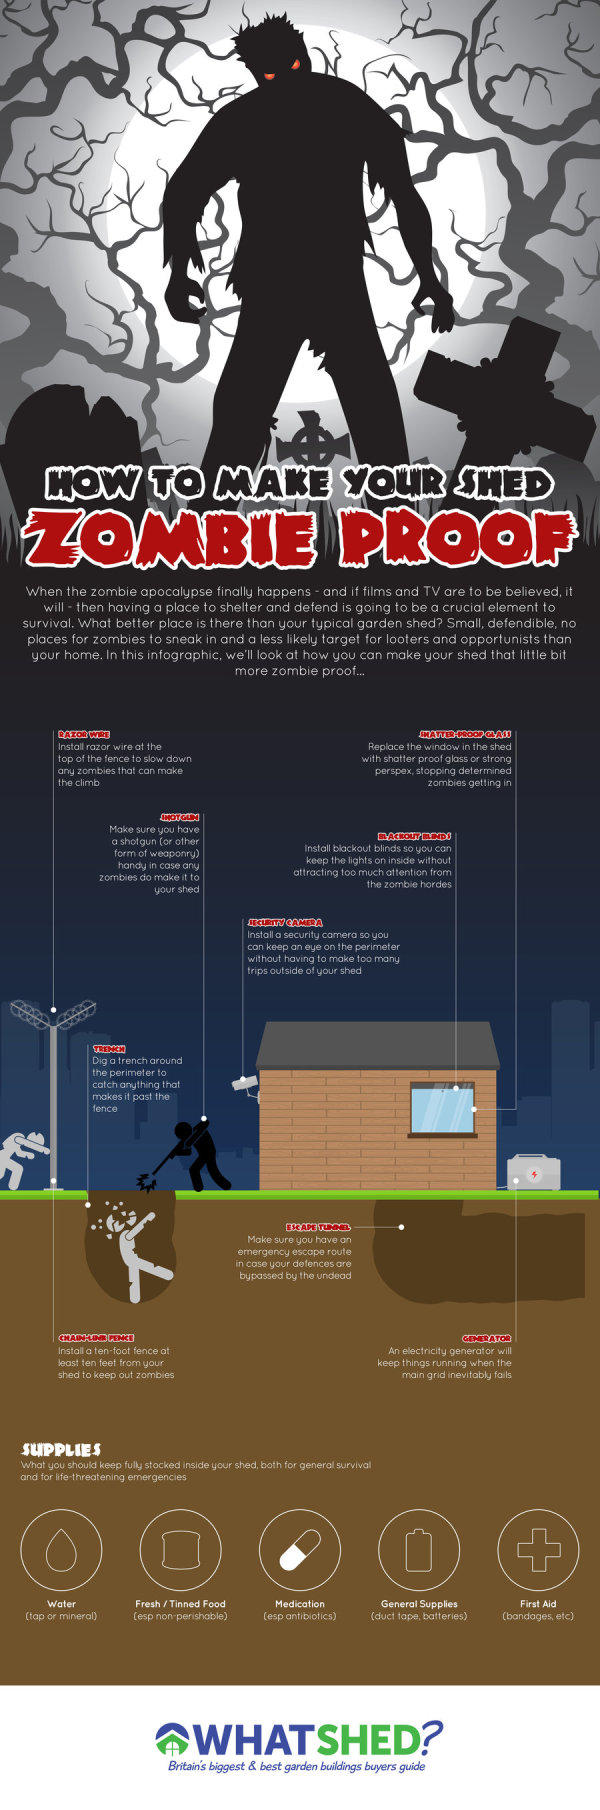 How to Make Your Shed Zombie Proof infographic